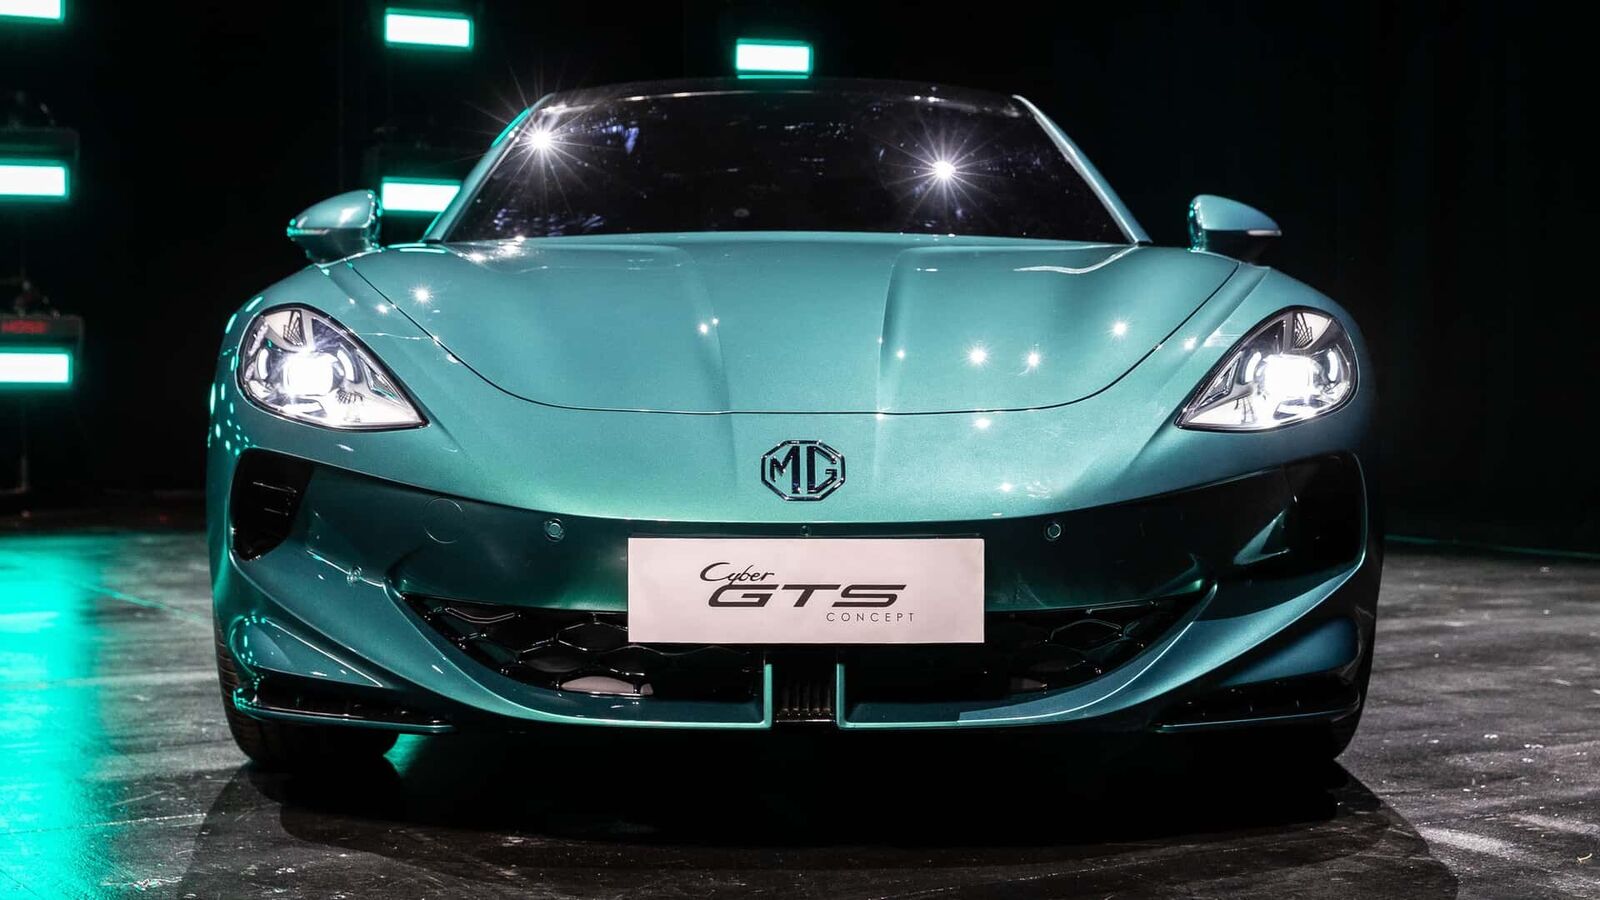 MG Cyber GTS debuts at Goodwood Festival of Speed, adopts Porsche 911 like style